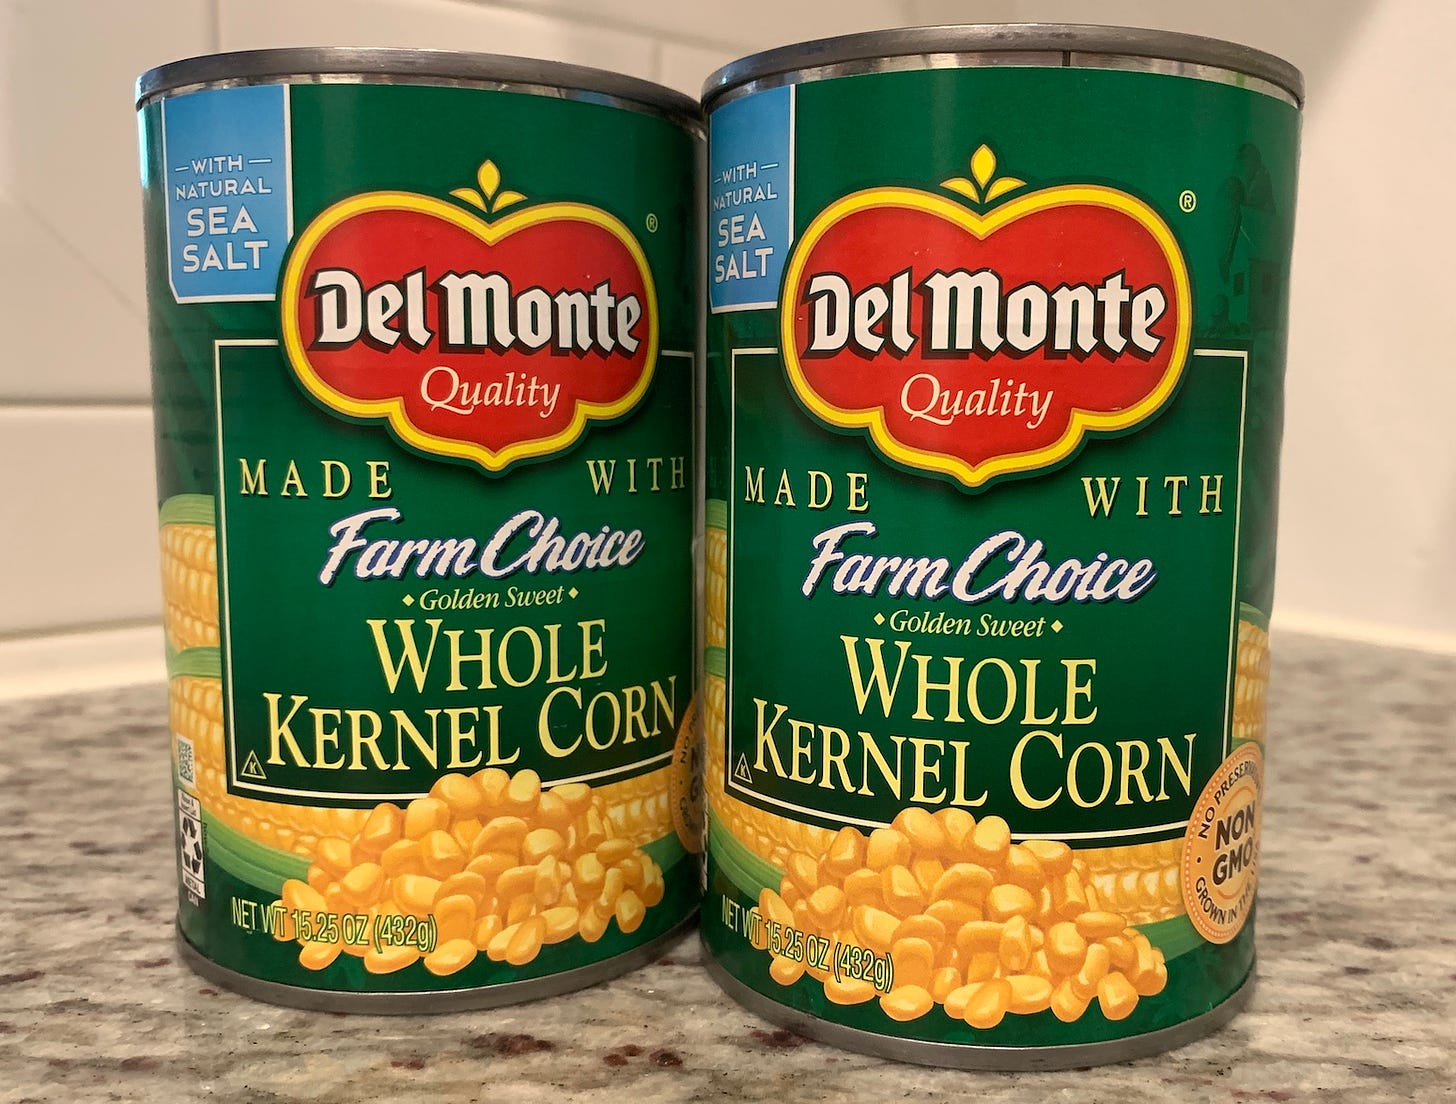 Two cans of Del Monte whole kernel corn sitting on a granite countertop